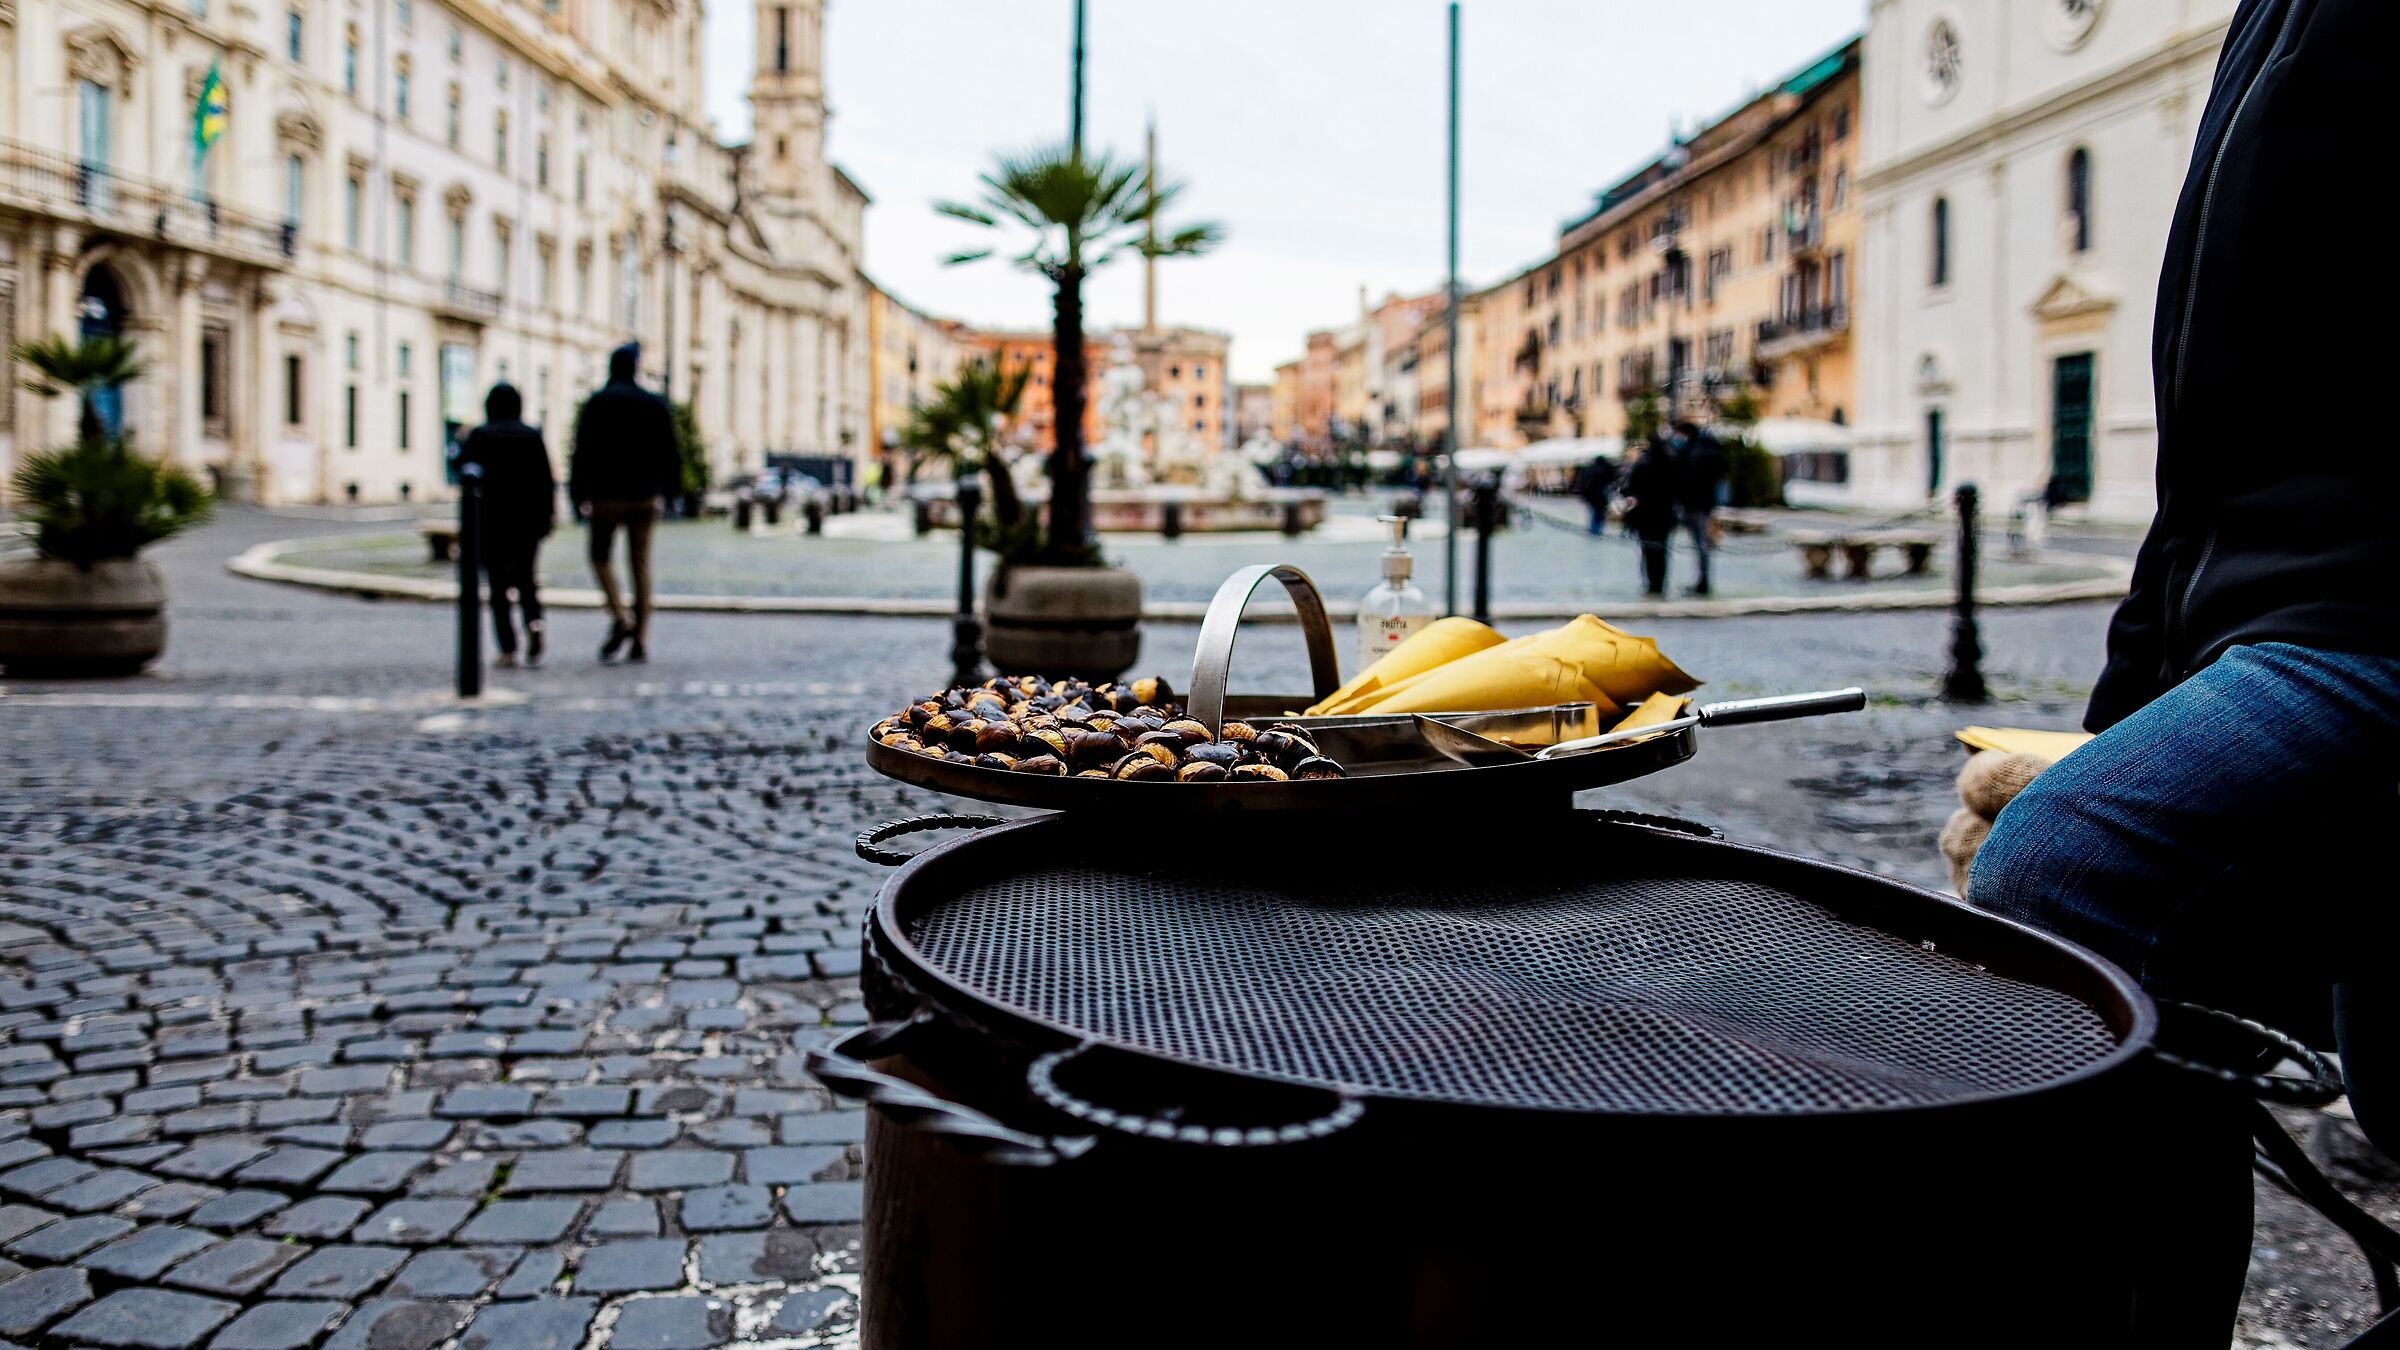 The roasted chestnuts of Piazza Navona...